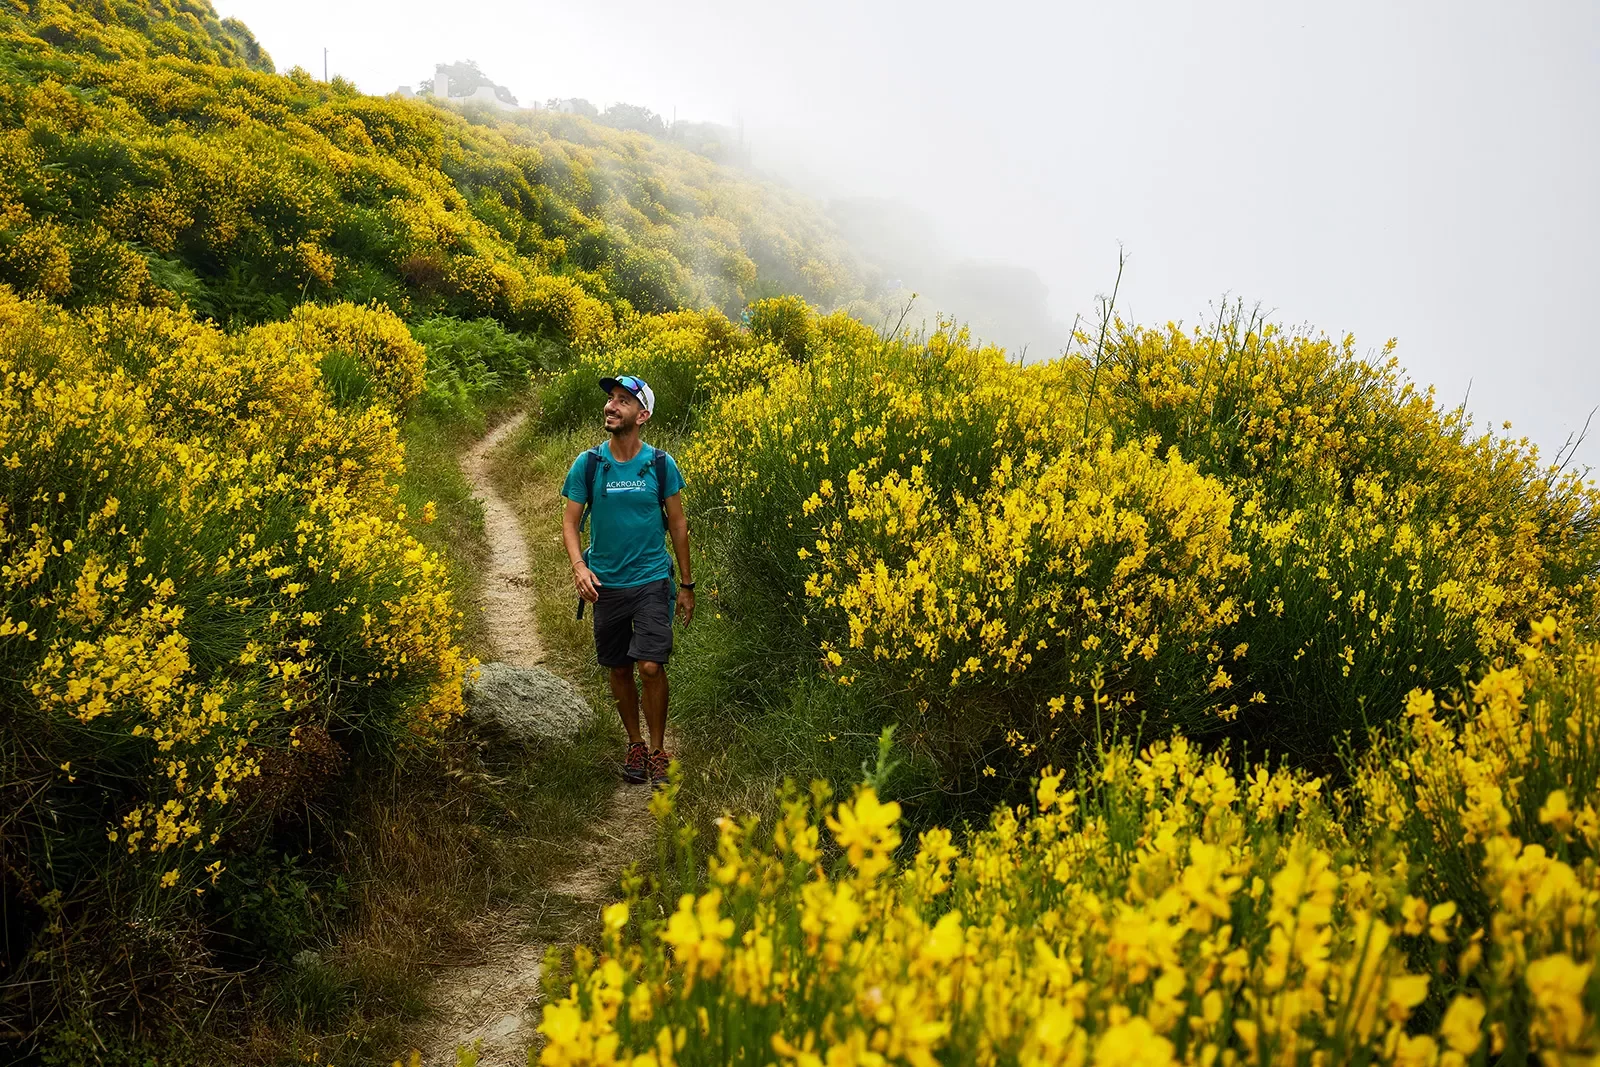 Guest hiking down coastal trail, yellow flower bushes all around.